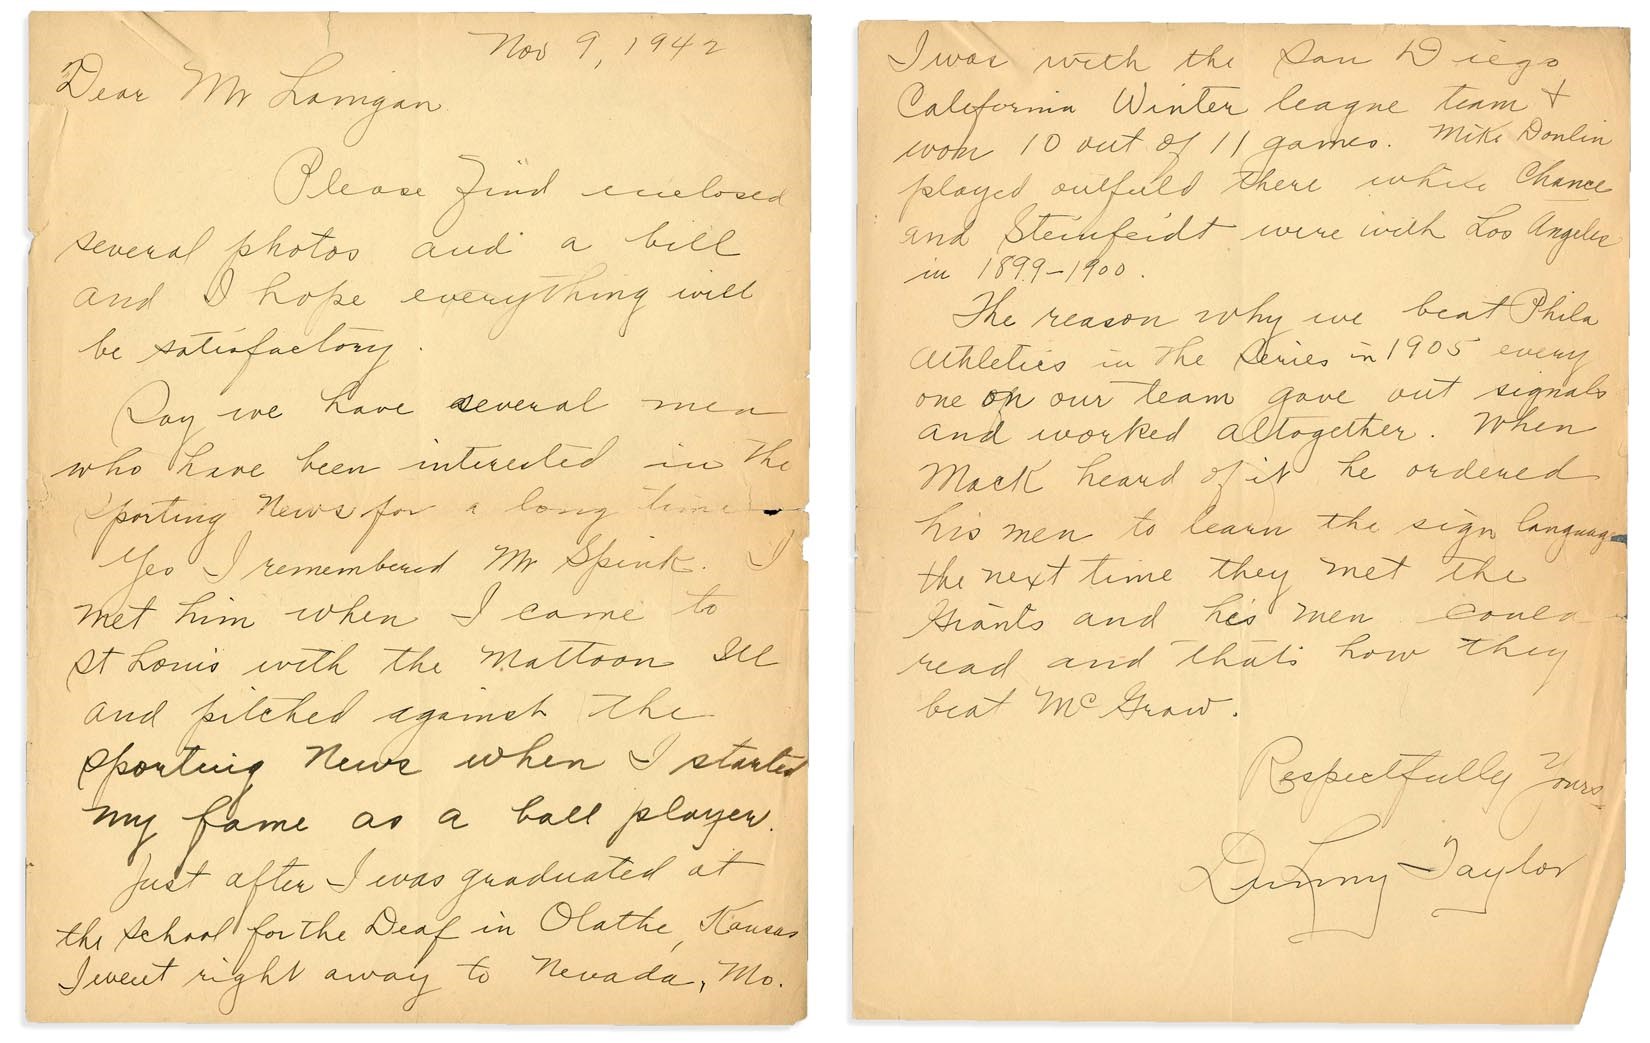 Baseball Autographs - Important Dummy Taylor Letter on How Mack Beat McGraw In 1905 World Series (PSA)